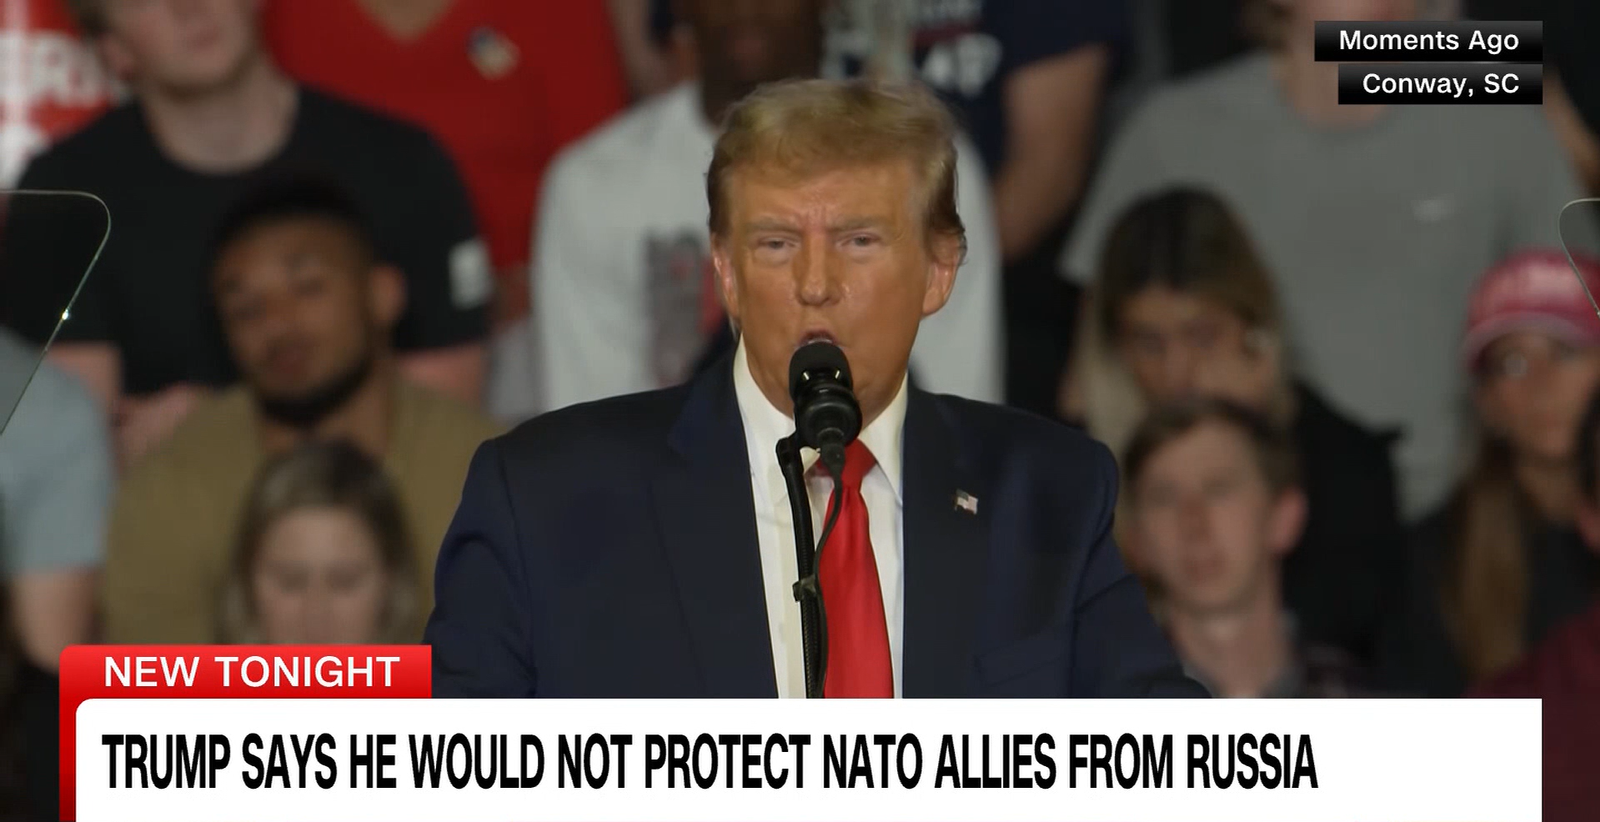 Trump’s Stance on NATO: A Closer Look